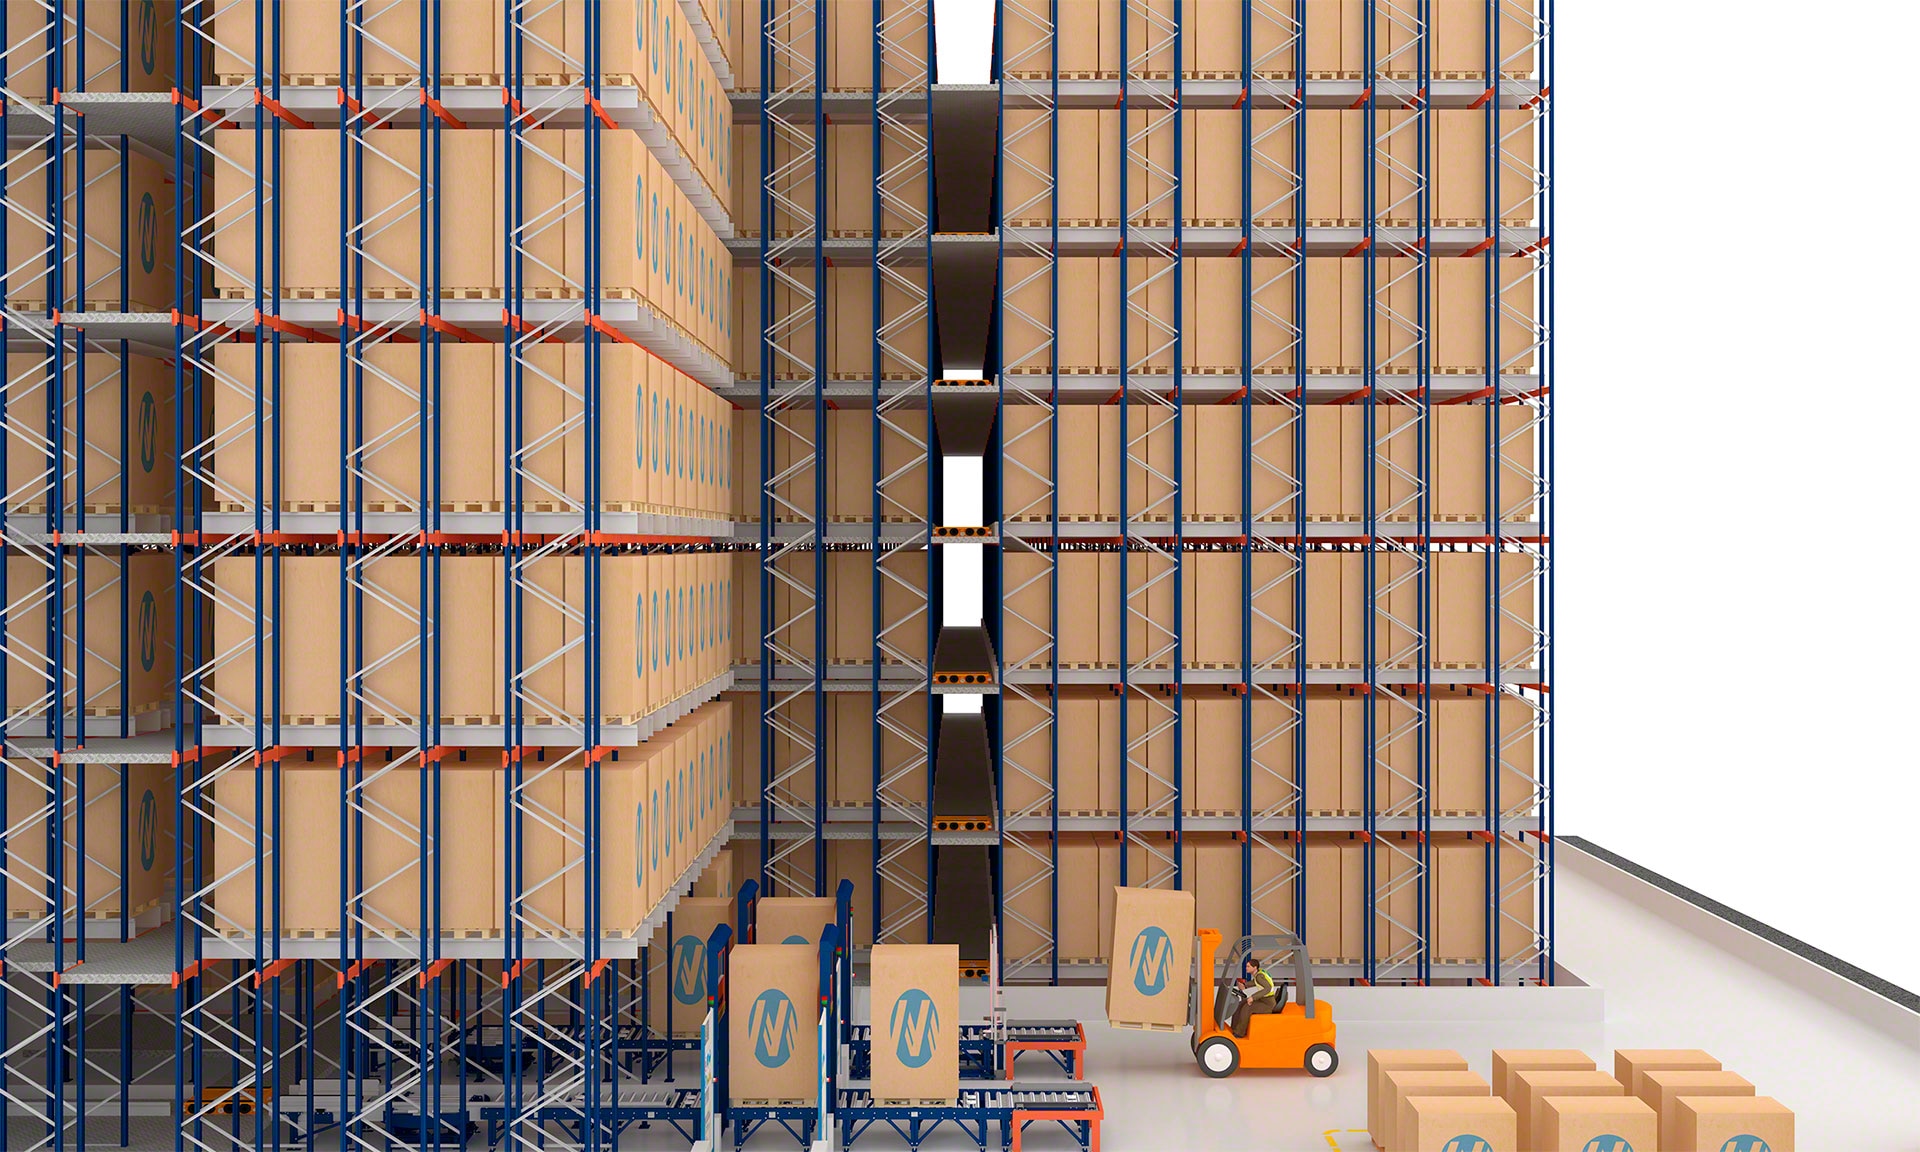 The 3D Automated Pallet Shuttle optimises space to boost capacity